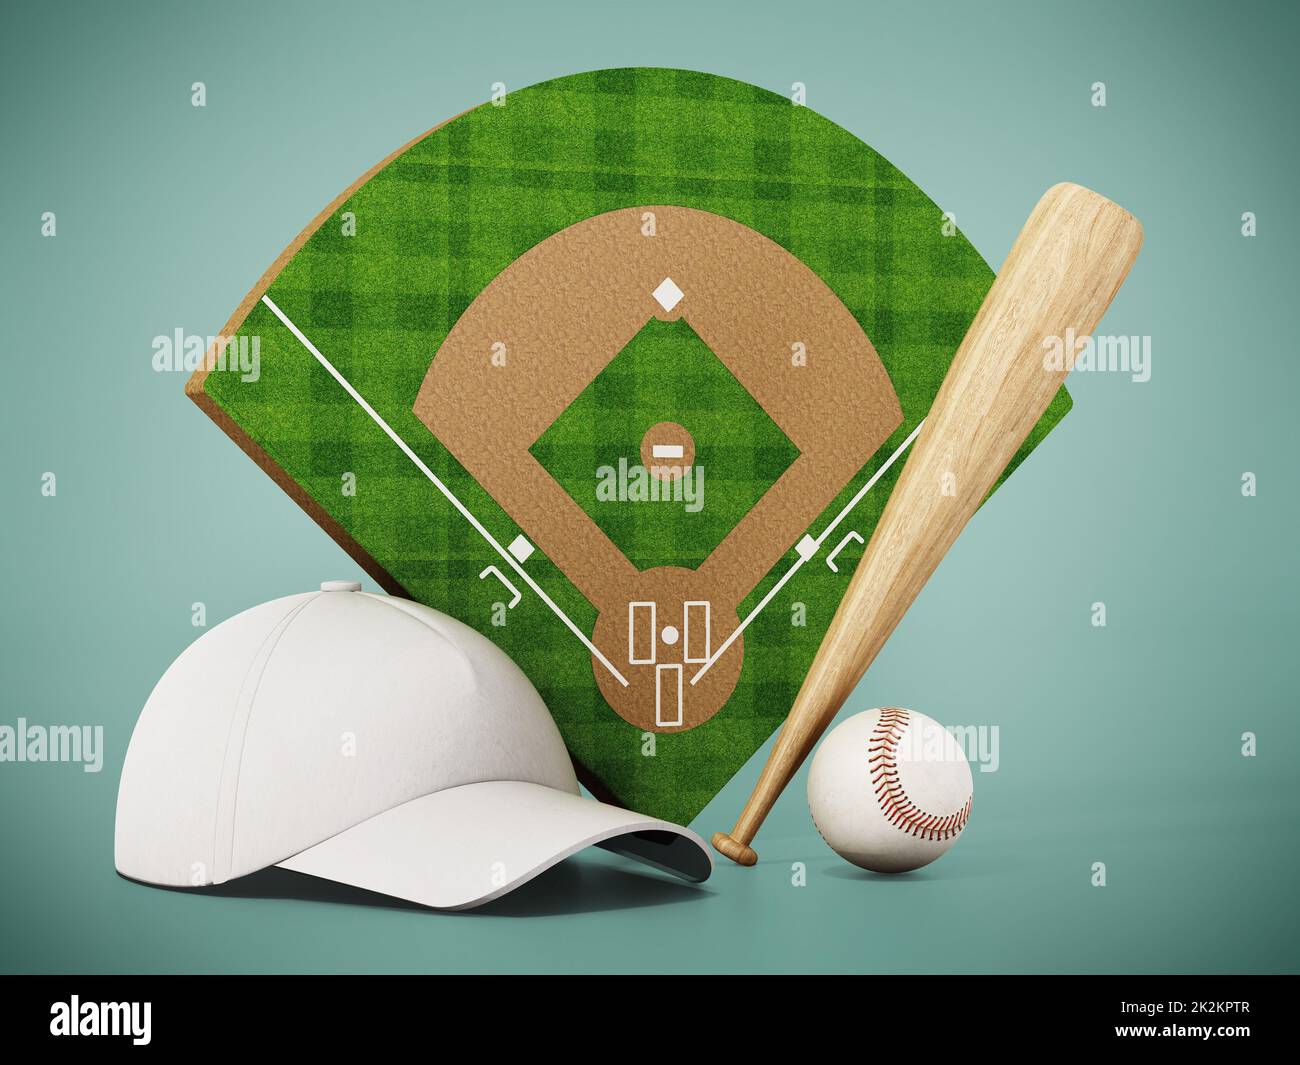 1,084 Softball Group Images, Stock Photos, 3D objects, & Vectors